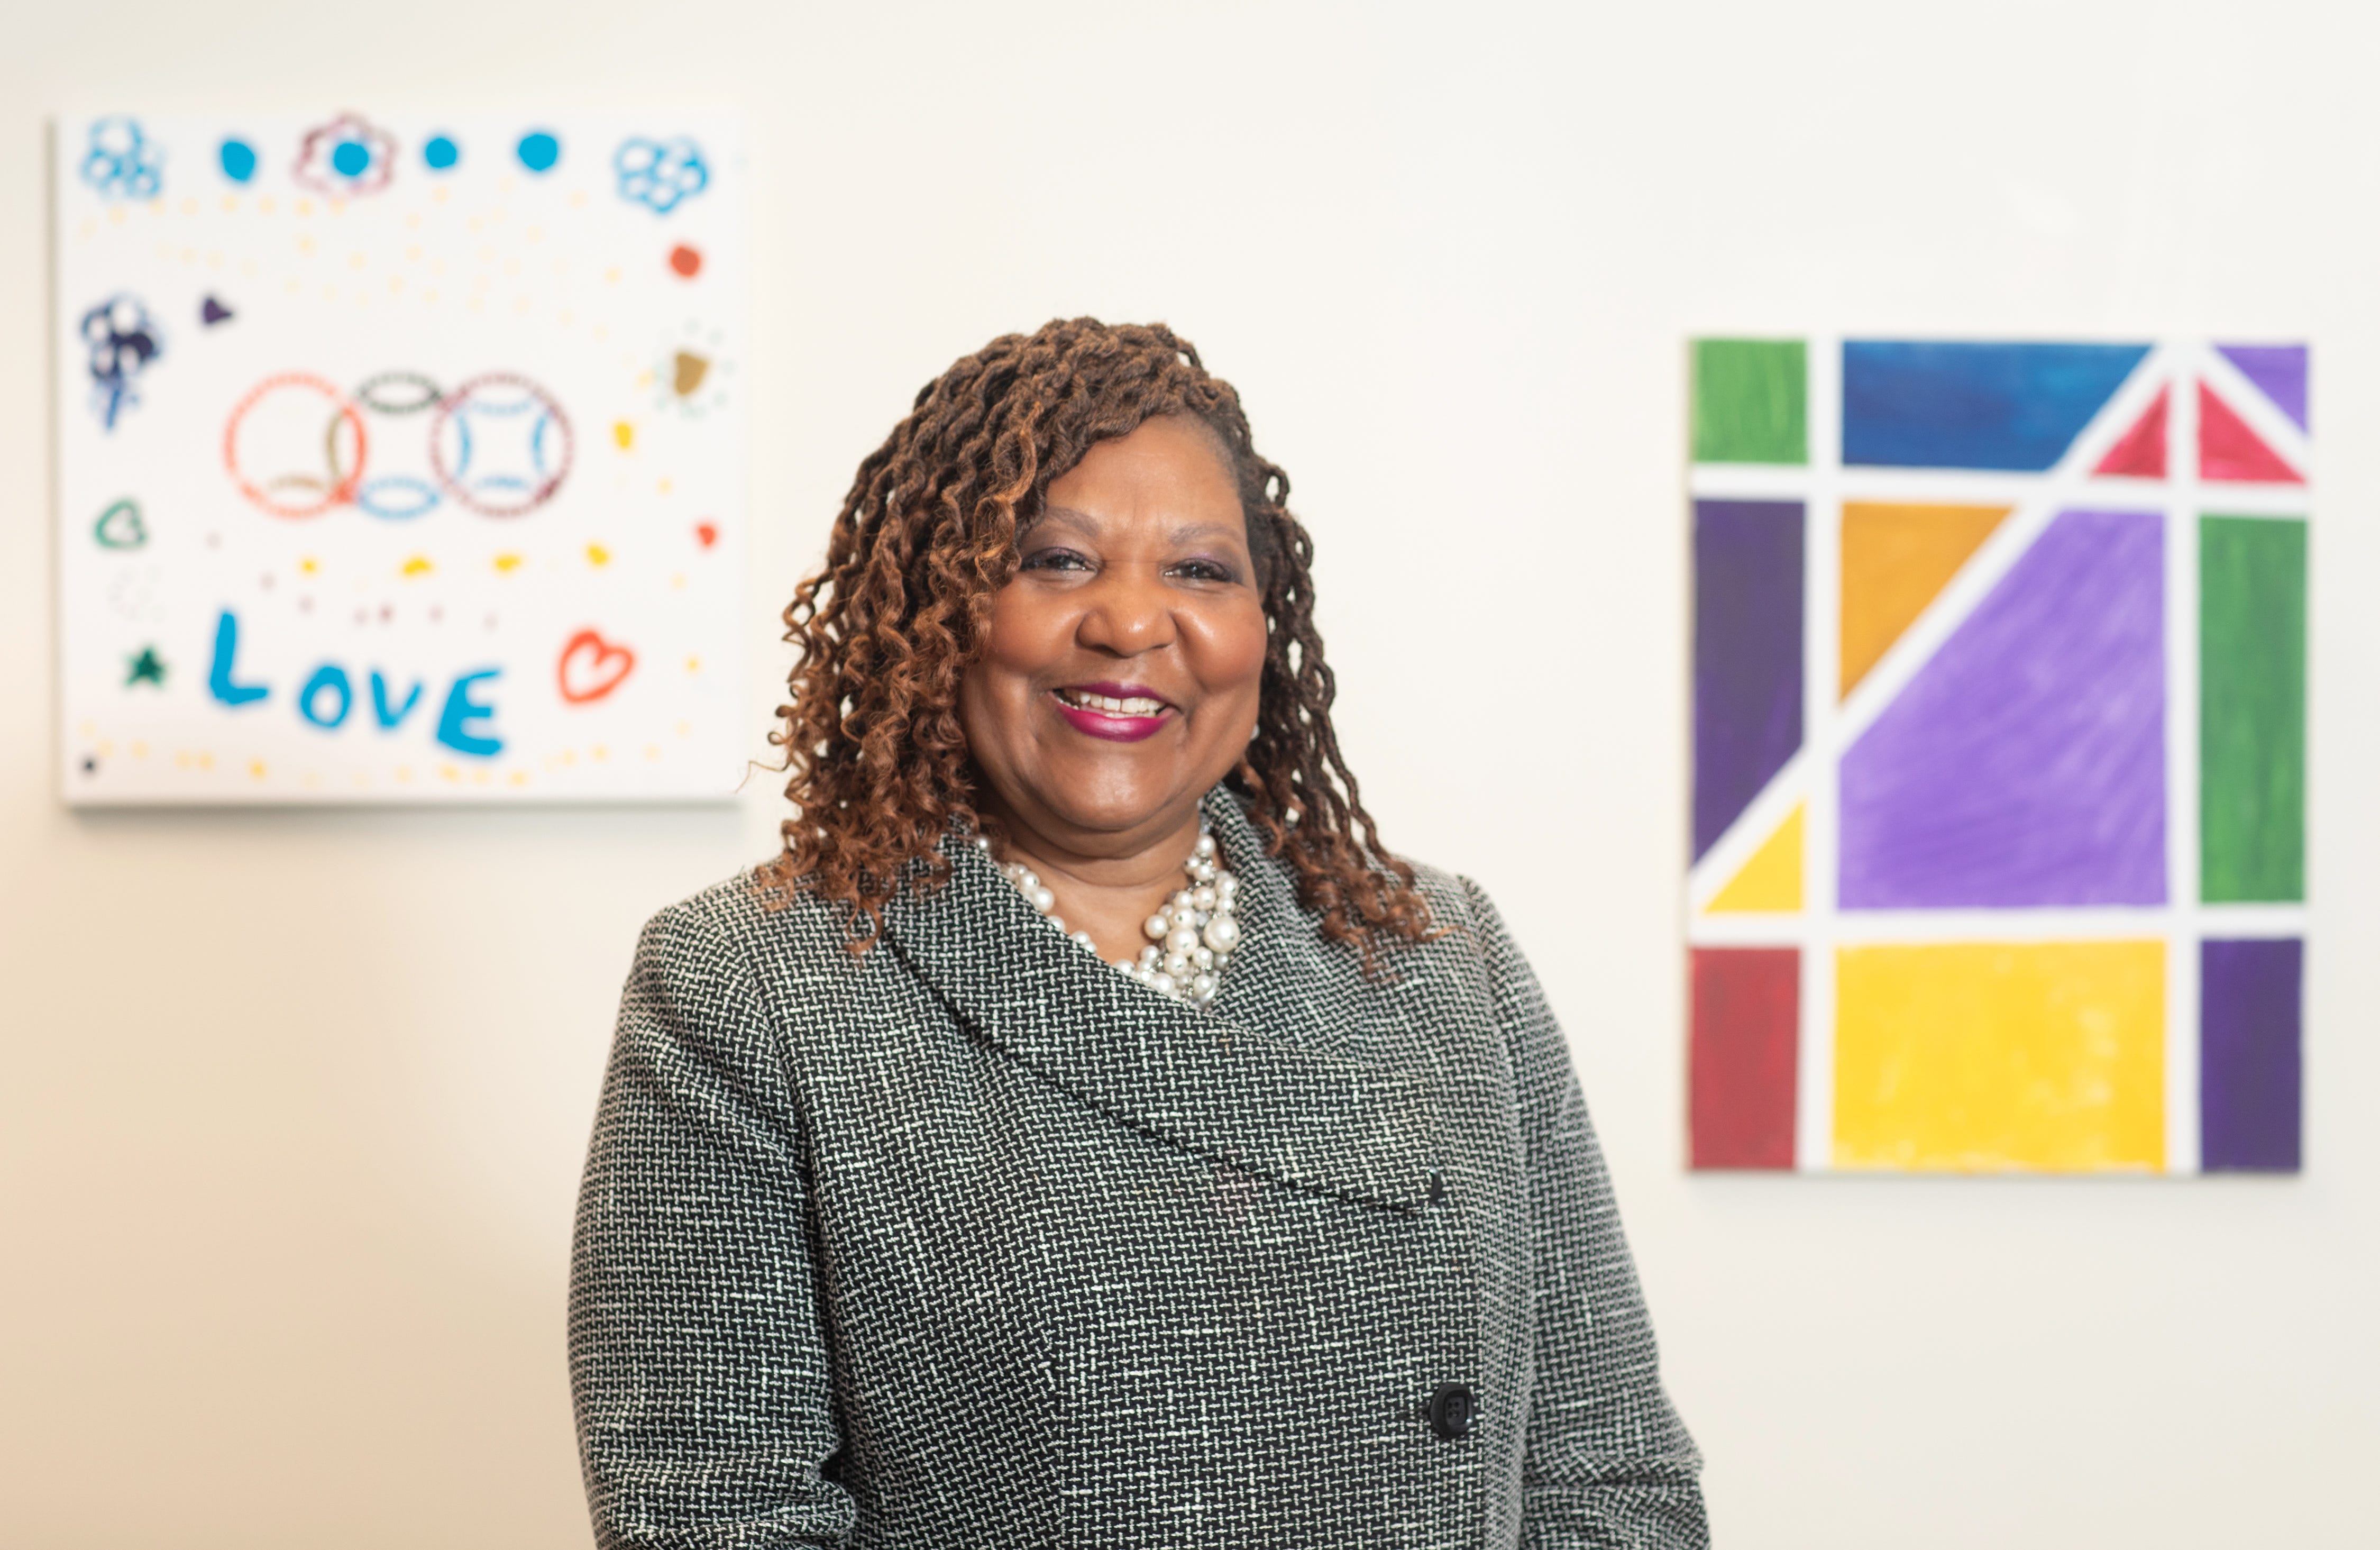 Denise Robinson, president and CEO of Alvis Inc., is the 2023 CEO of the Year winner in the Large Nonprofit category.